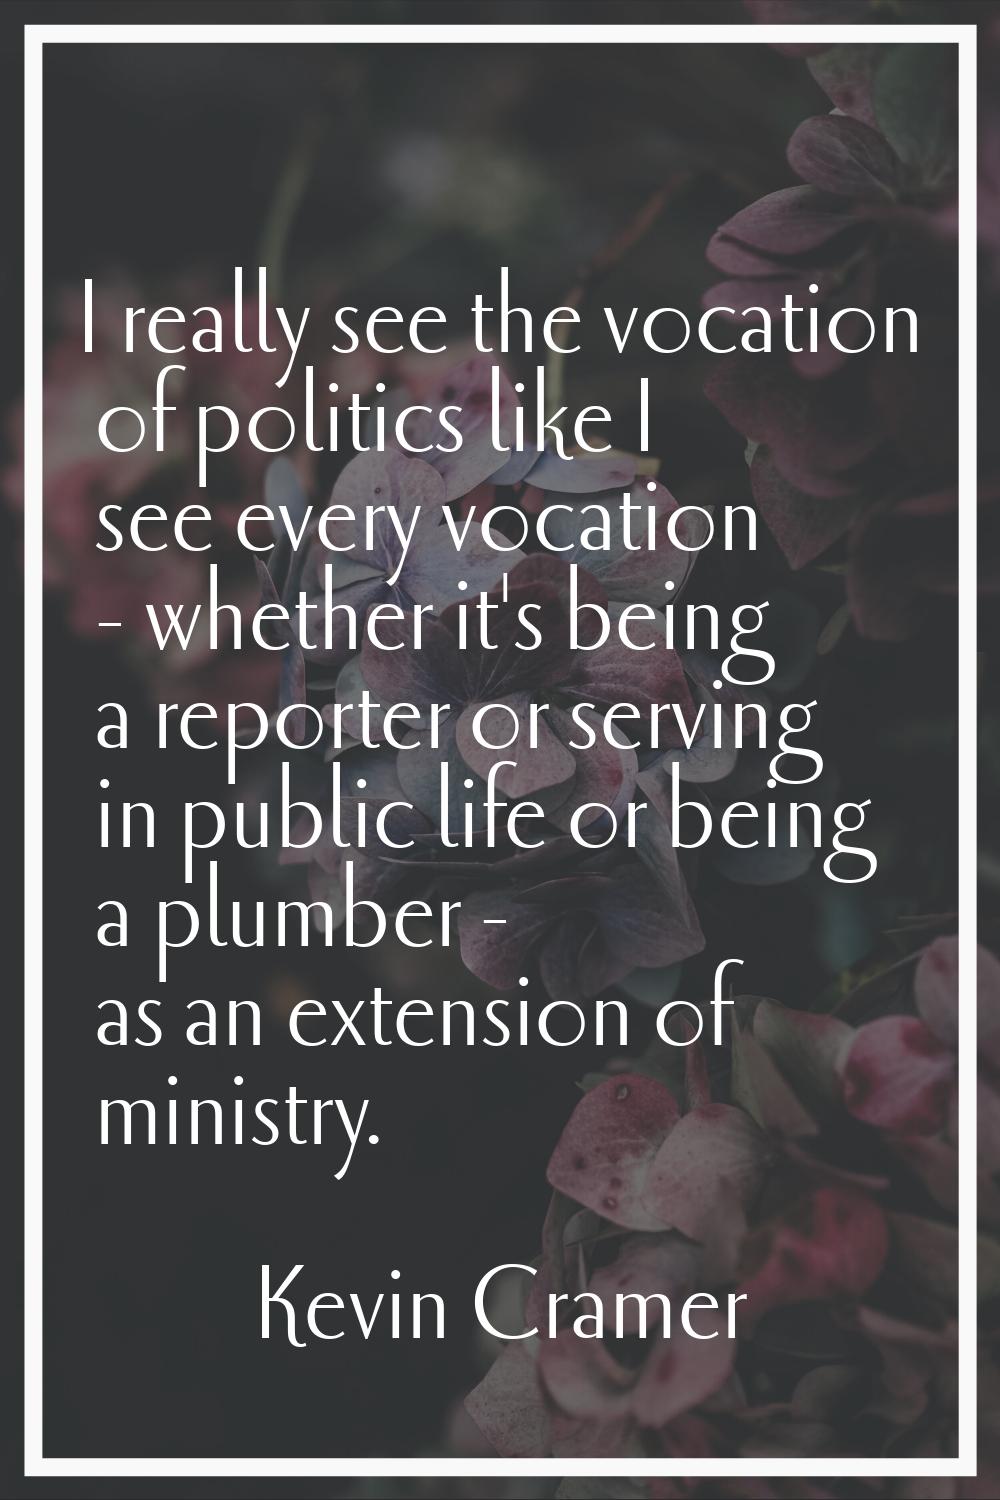 I really see the vocation of politics like I see every vocation - whether it's being a reporter or 